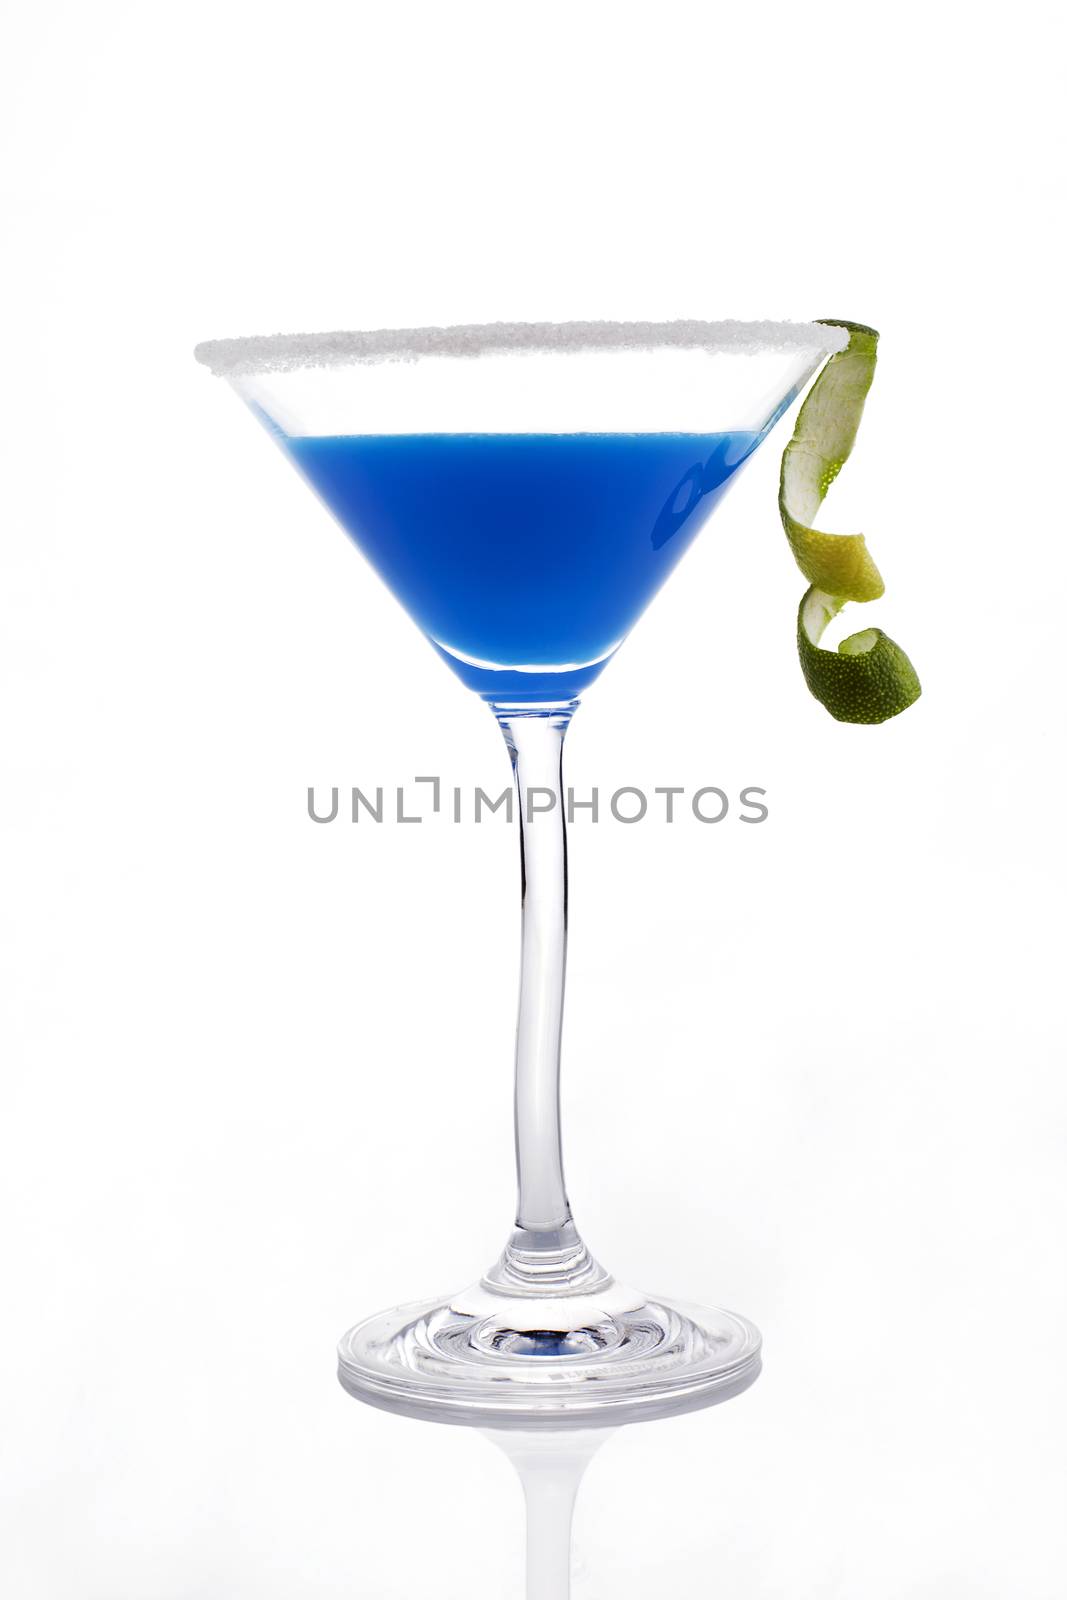 Delicious blue creamy cocktail in cocktail glass isolated on white background. Decorated with lime garnish.